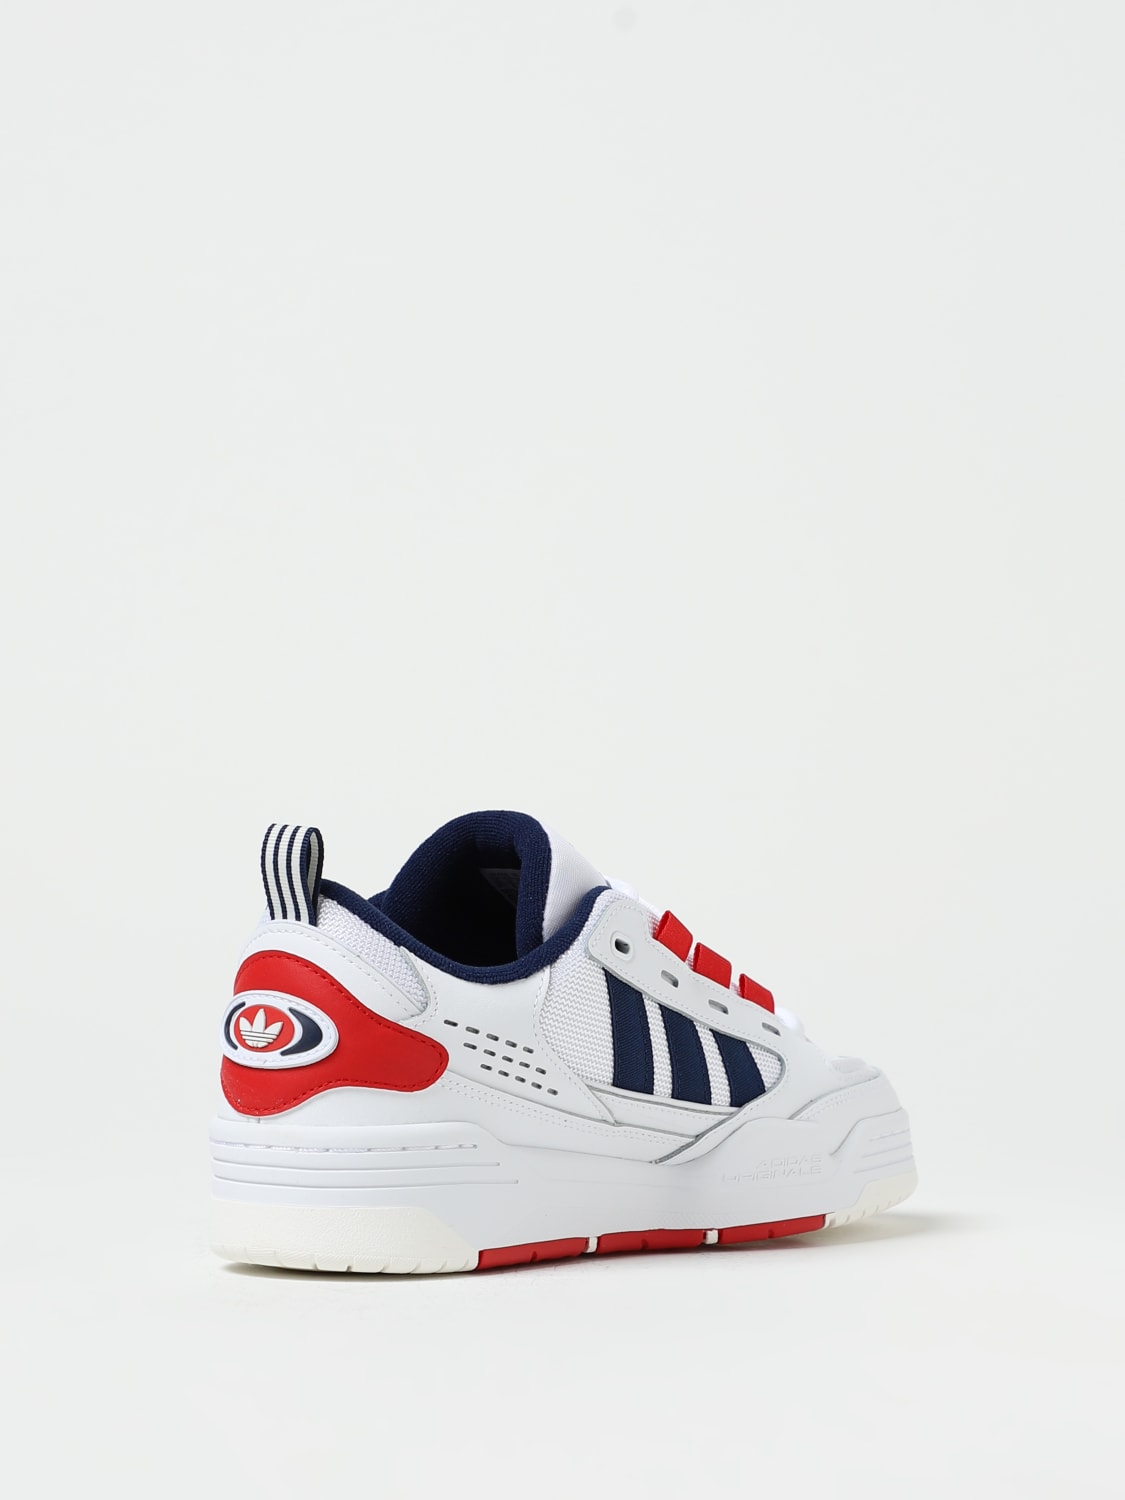 ID2103 - mesh ORIGINALS: White online in Originals | at and sneakers Adidas leather sneakers ADI2000 ADIDAS